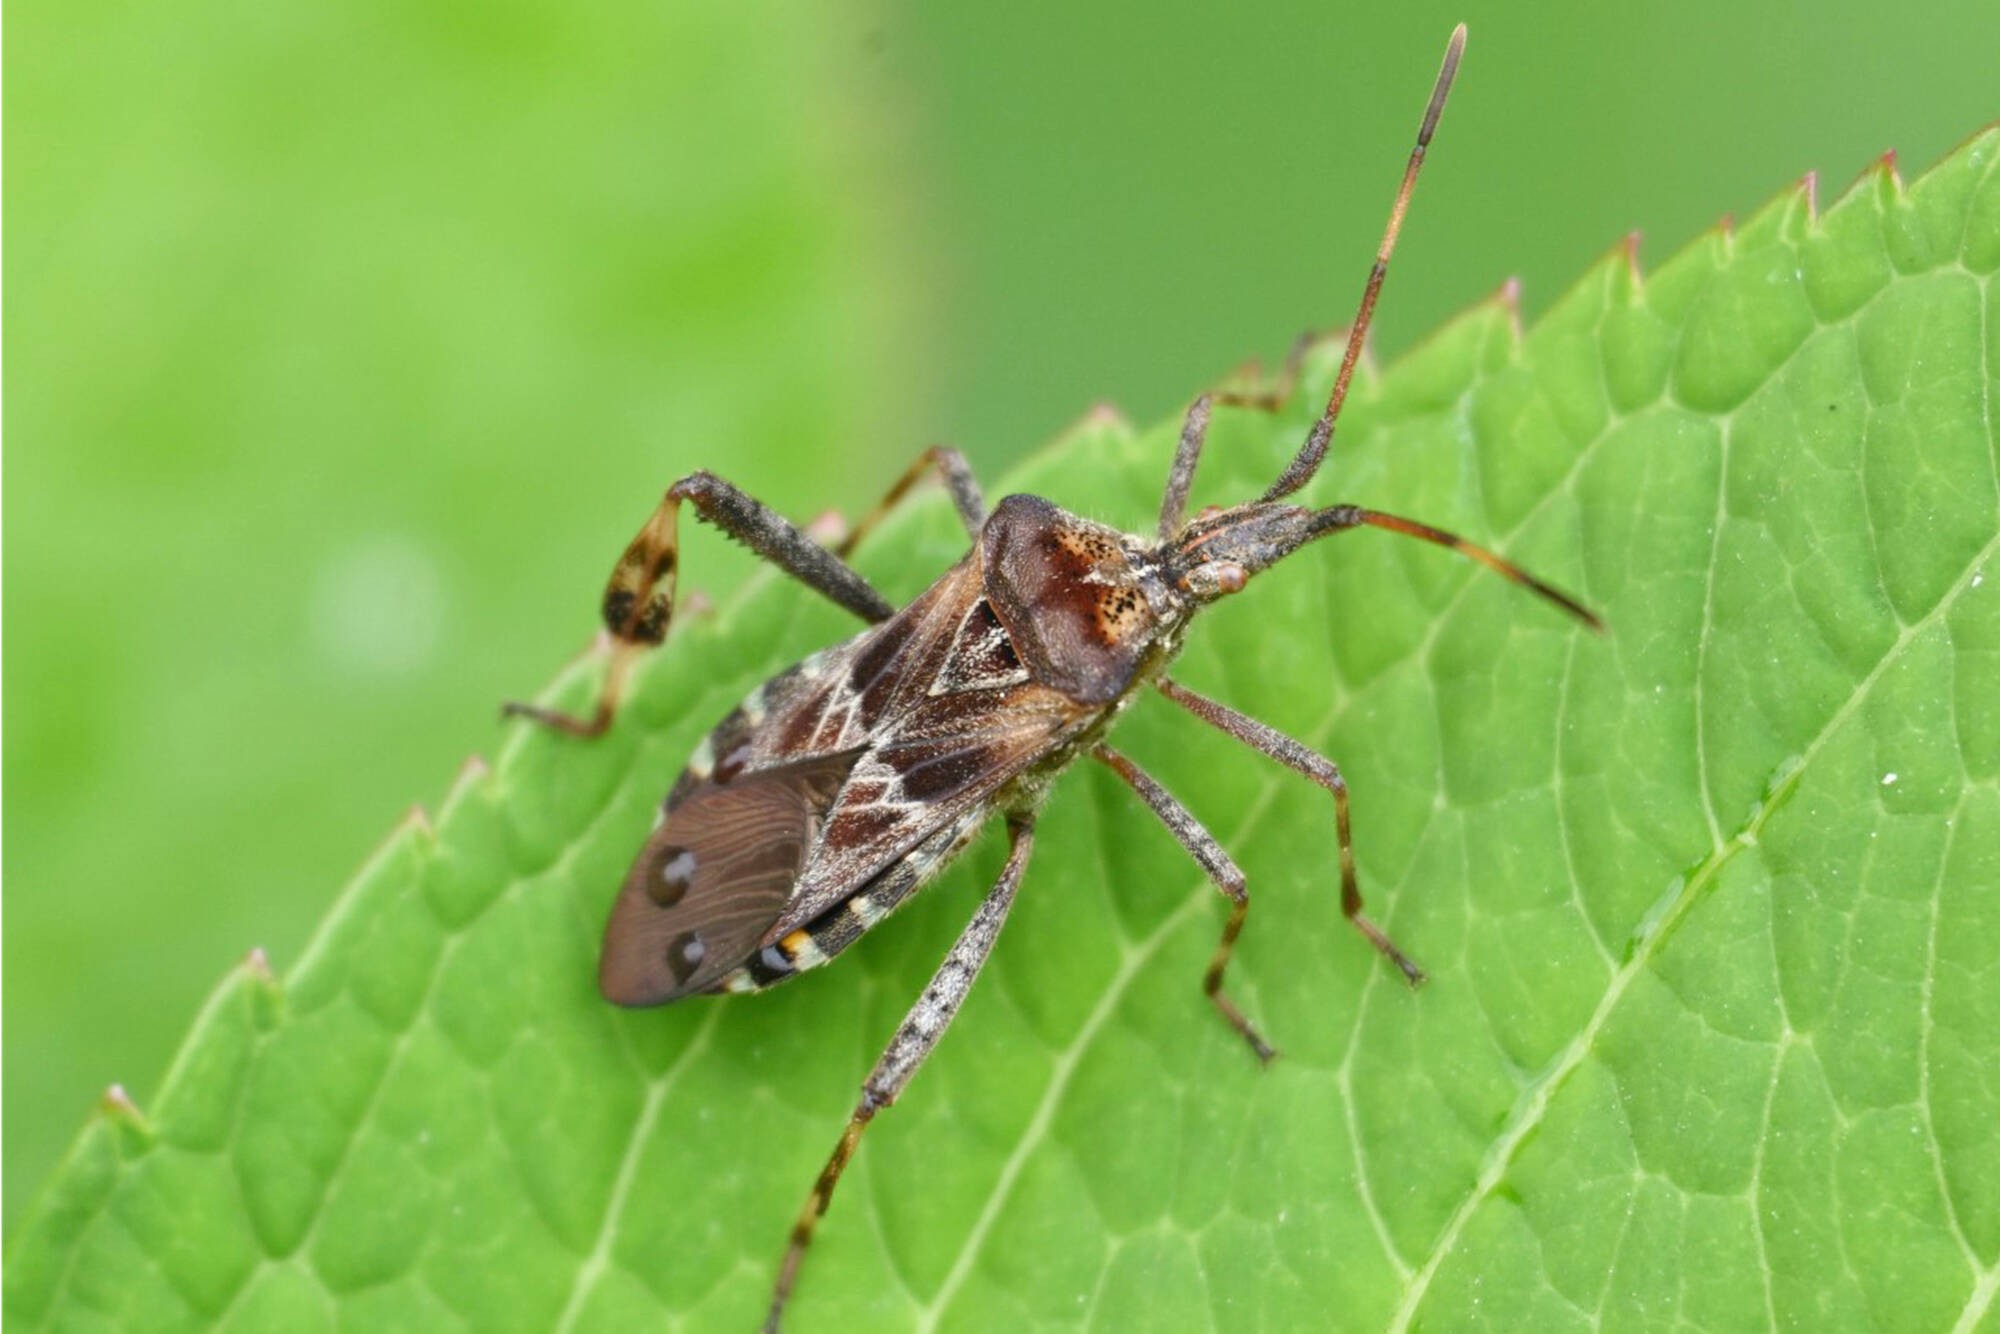 This adult western conifer seed bug is exploring for a place to spend the winter. (John G. Woods photo)